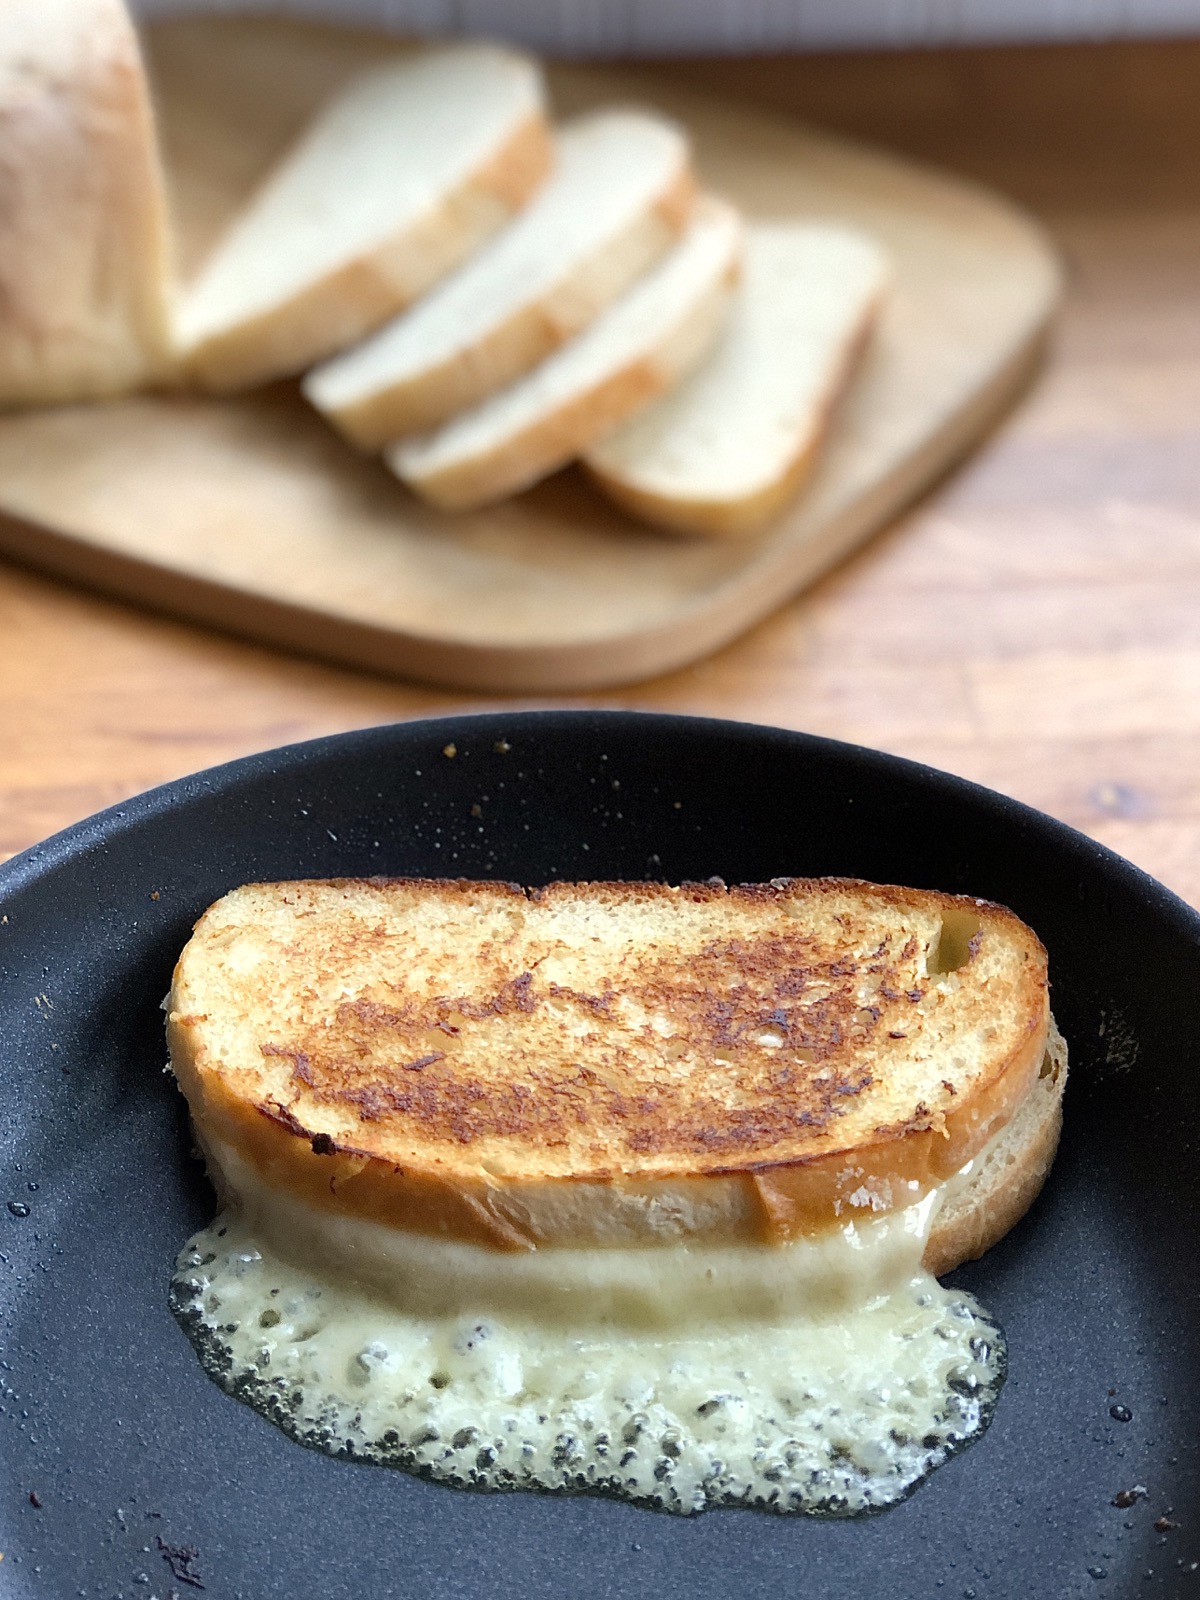 Grilled cheese sandwich in a frying pan, sliced bread in the background.